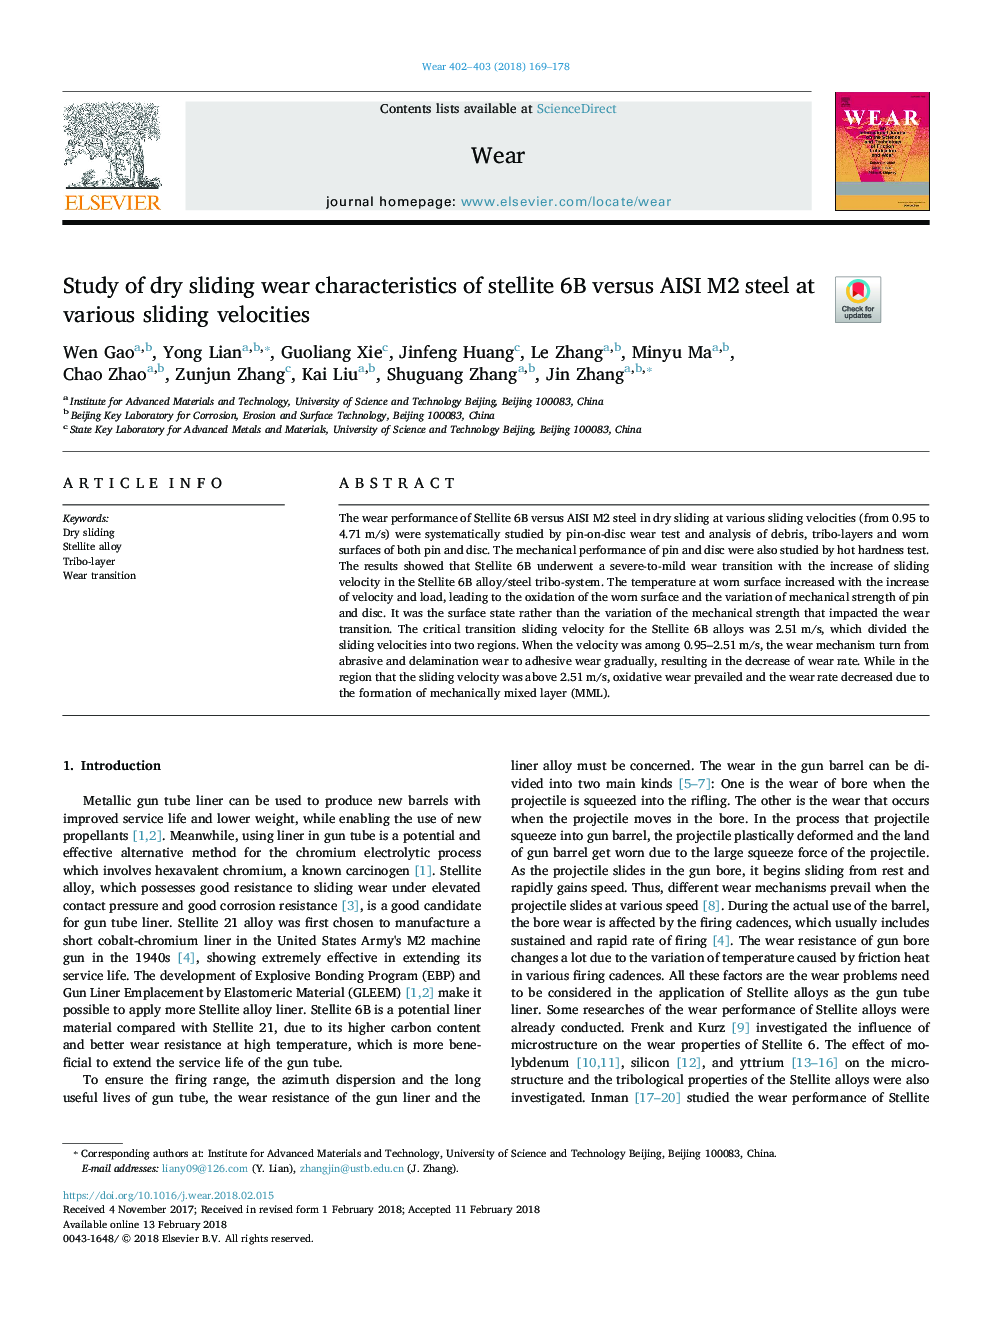 Study of dry sliding wear characteristics of stellite 6B versus AISI M2 steel at various sliding velocities